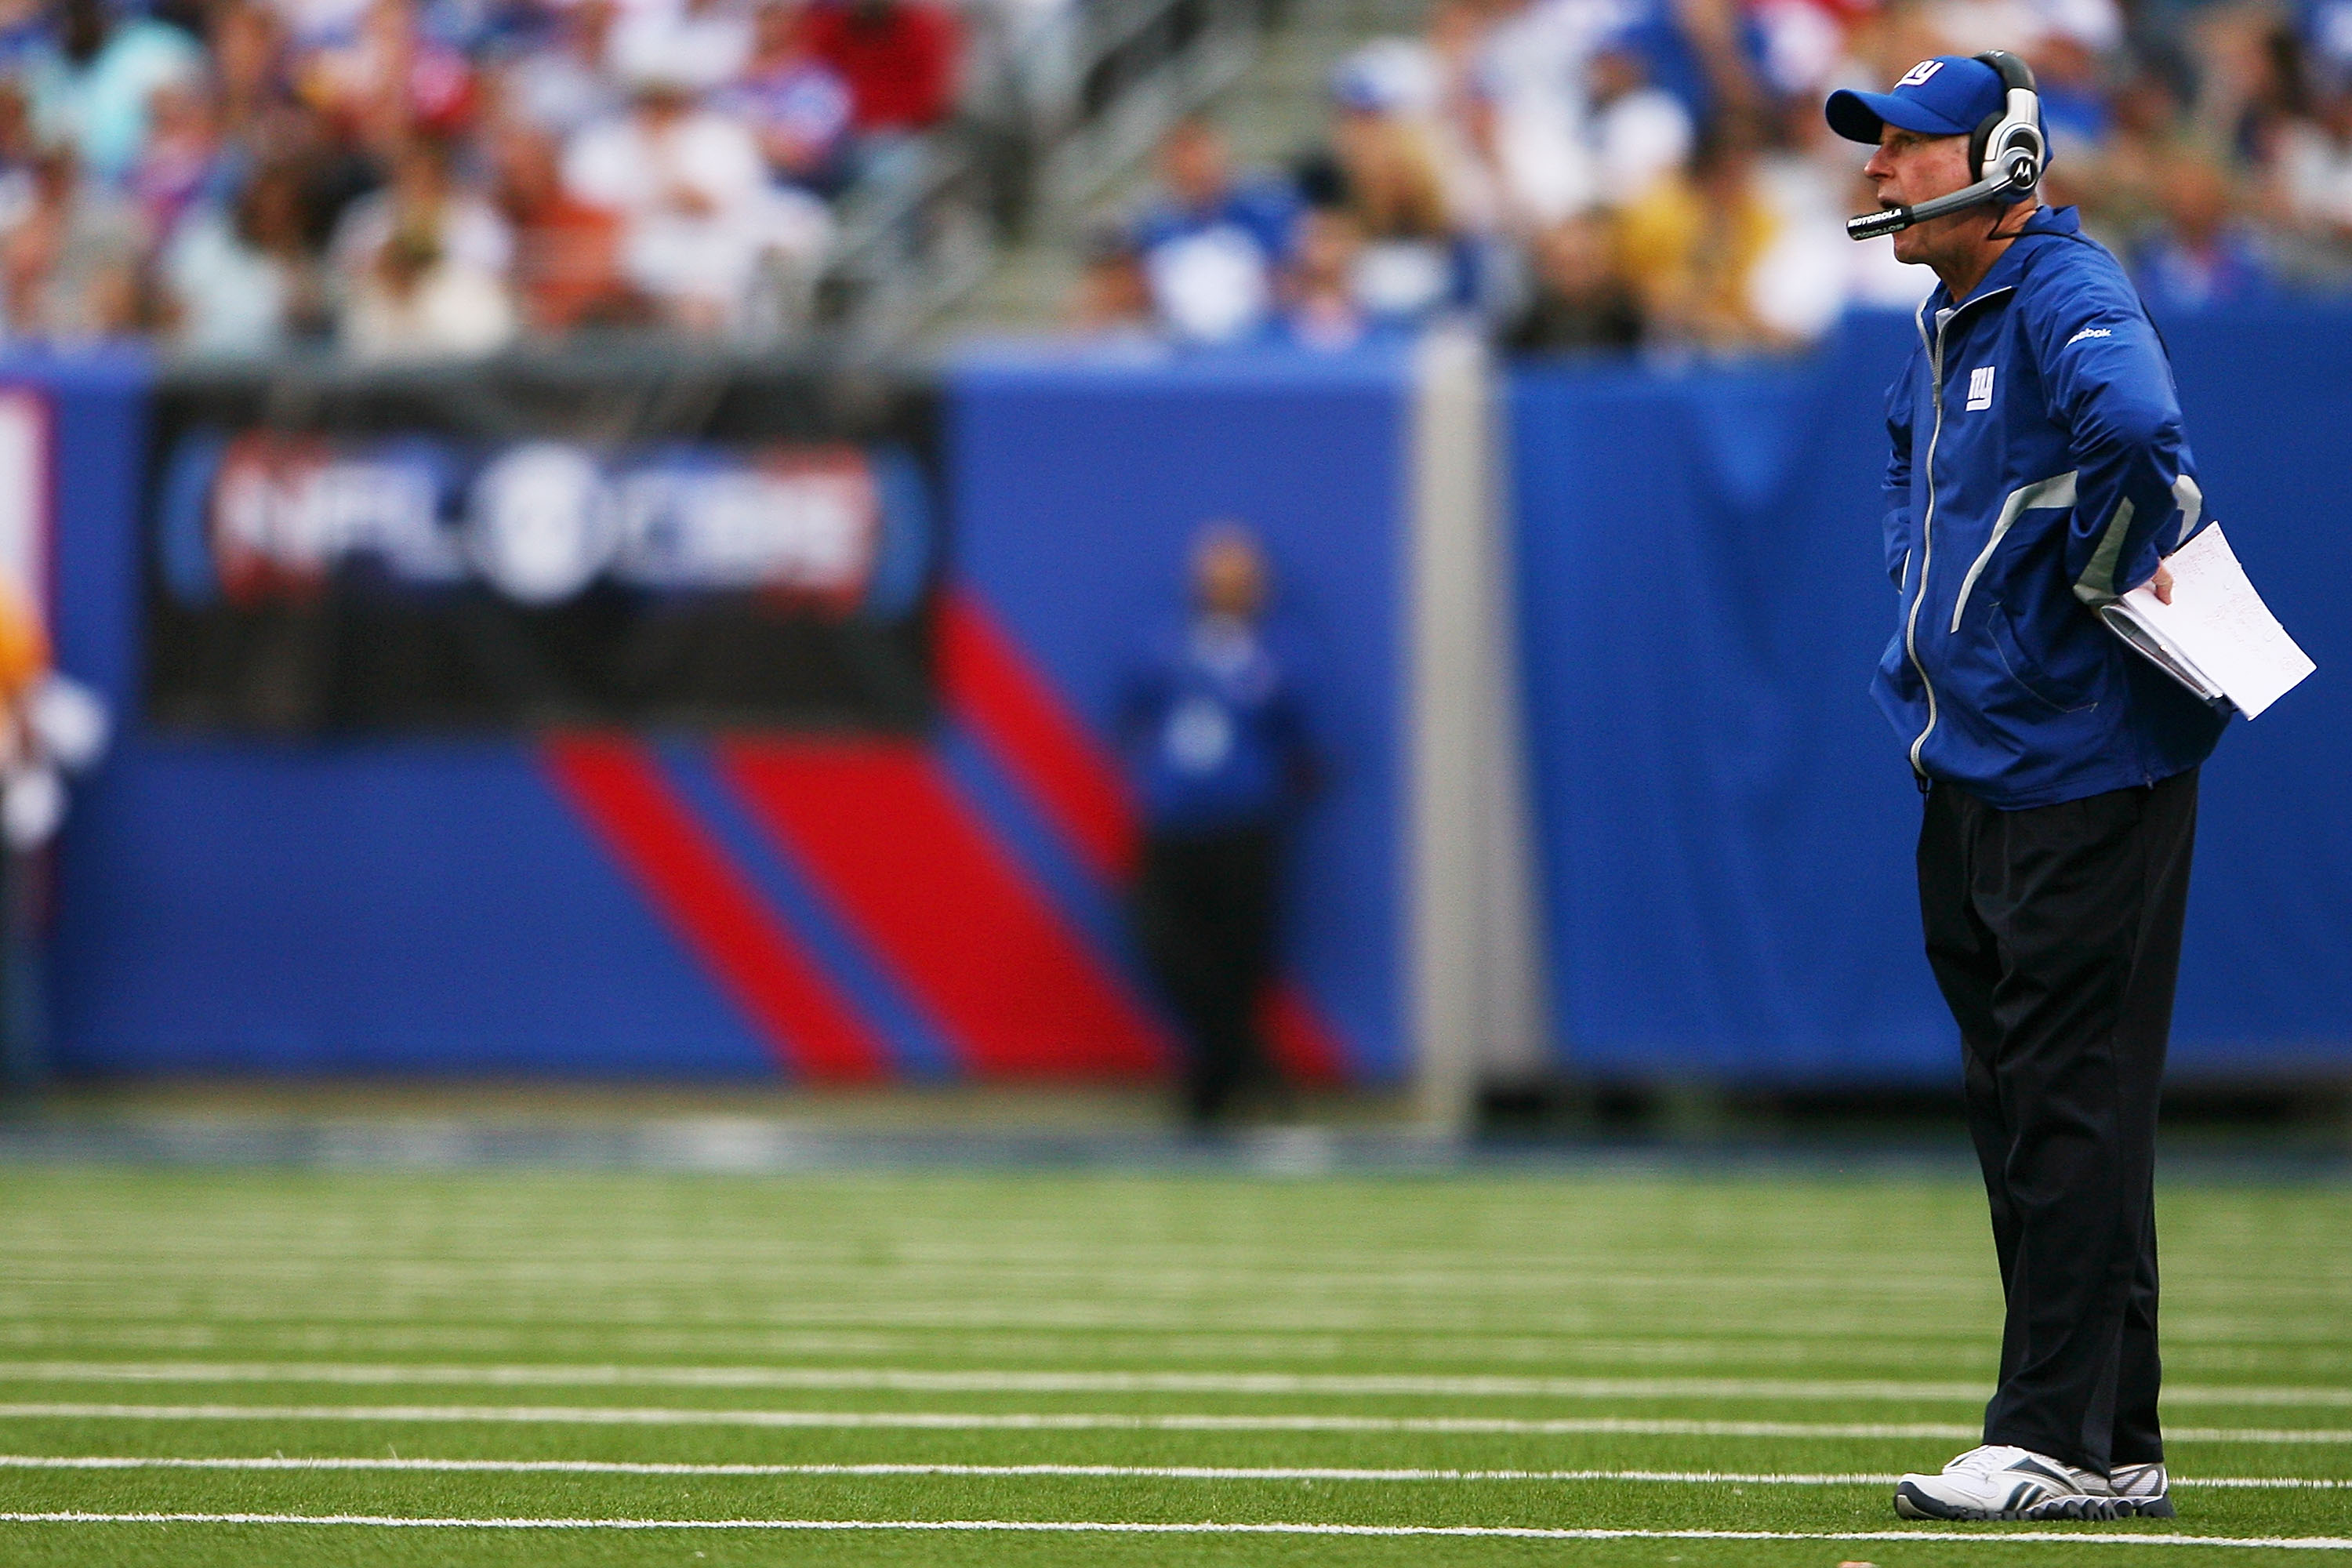 EAST RUTHERFORD, NJ - SEPTEMBER 26: Head coach Tom Coughlin of the New York Giants yells after a penalty during a game against the Tennessee Titans at New Meadowlands Stadium on September 26, 2010 in East Rutherford, New Jersey. The Titans beat the Giants